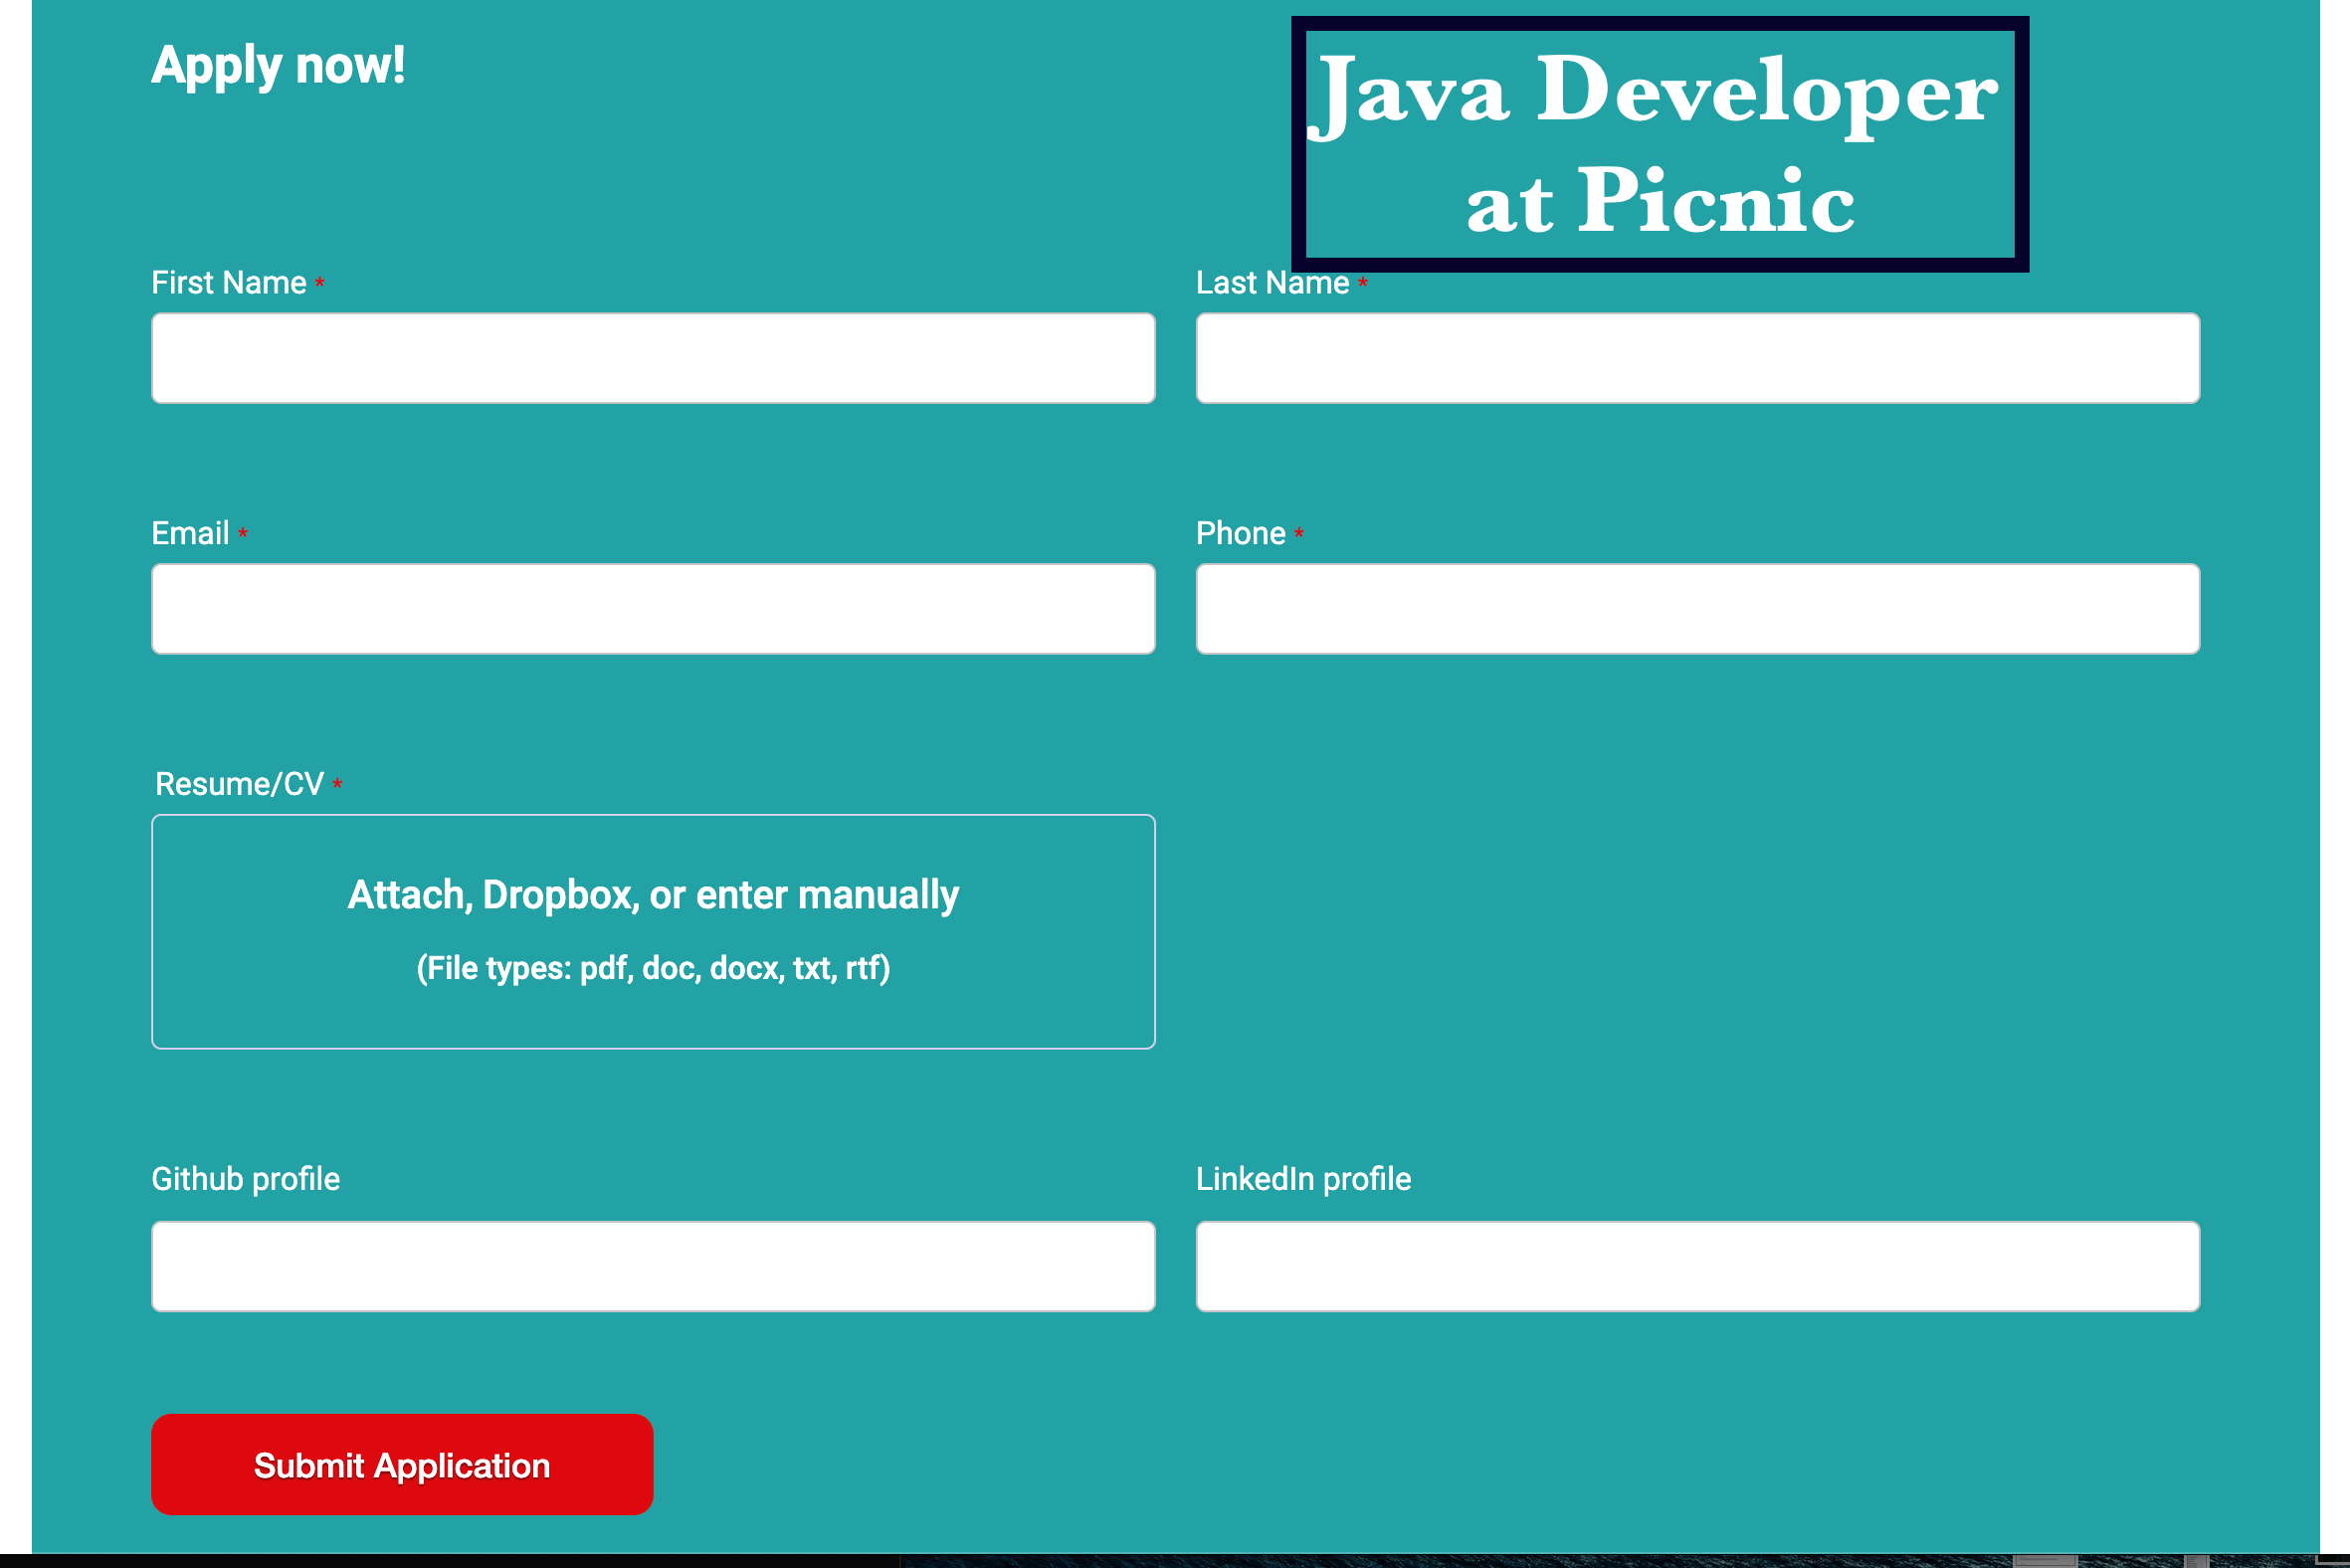 Career Opportunities as a Java Developer at Picnic